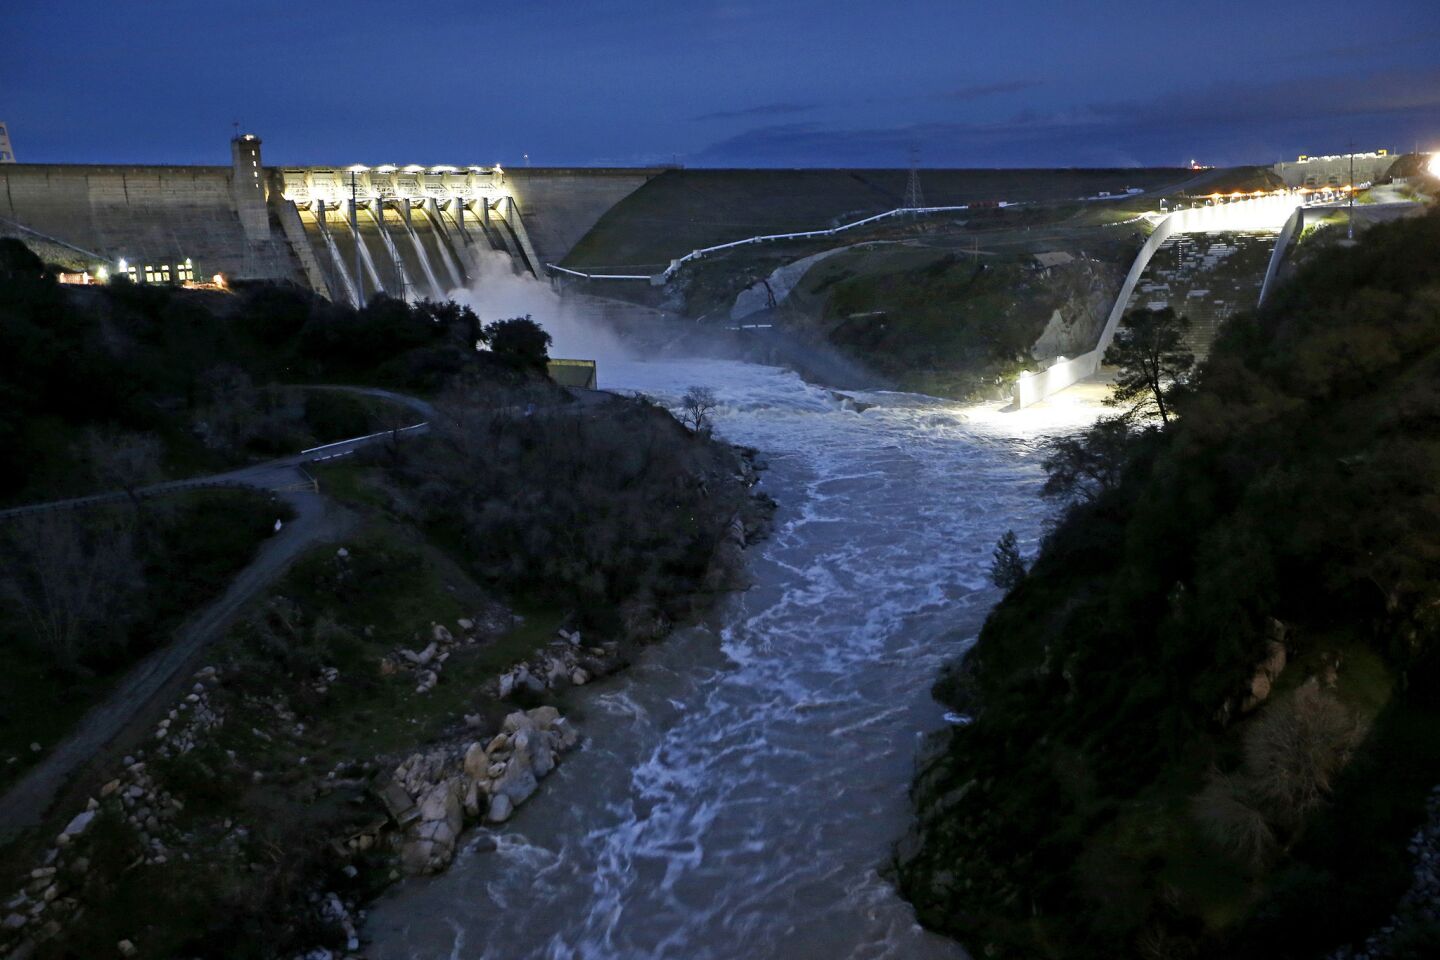 Water is released from Folsom Dam into the American River in Folsom.